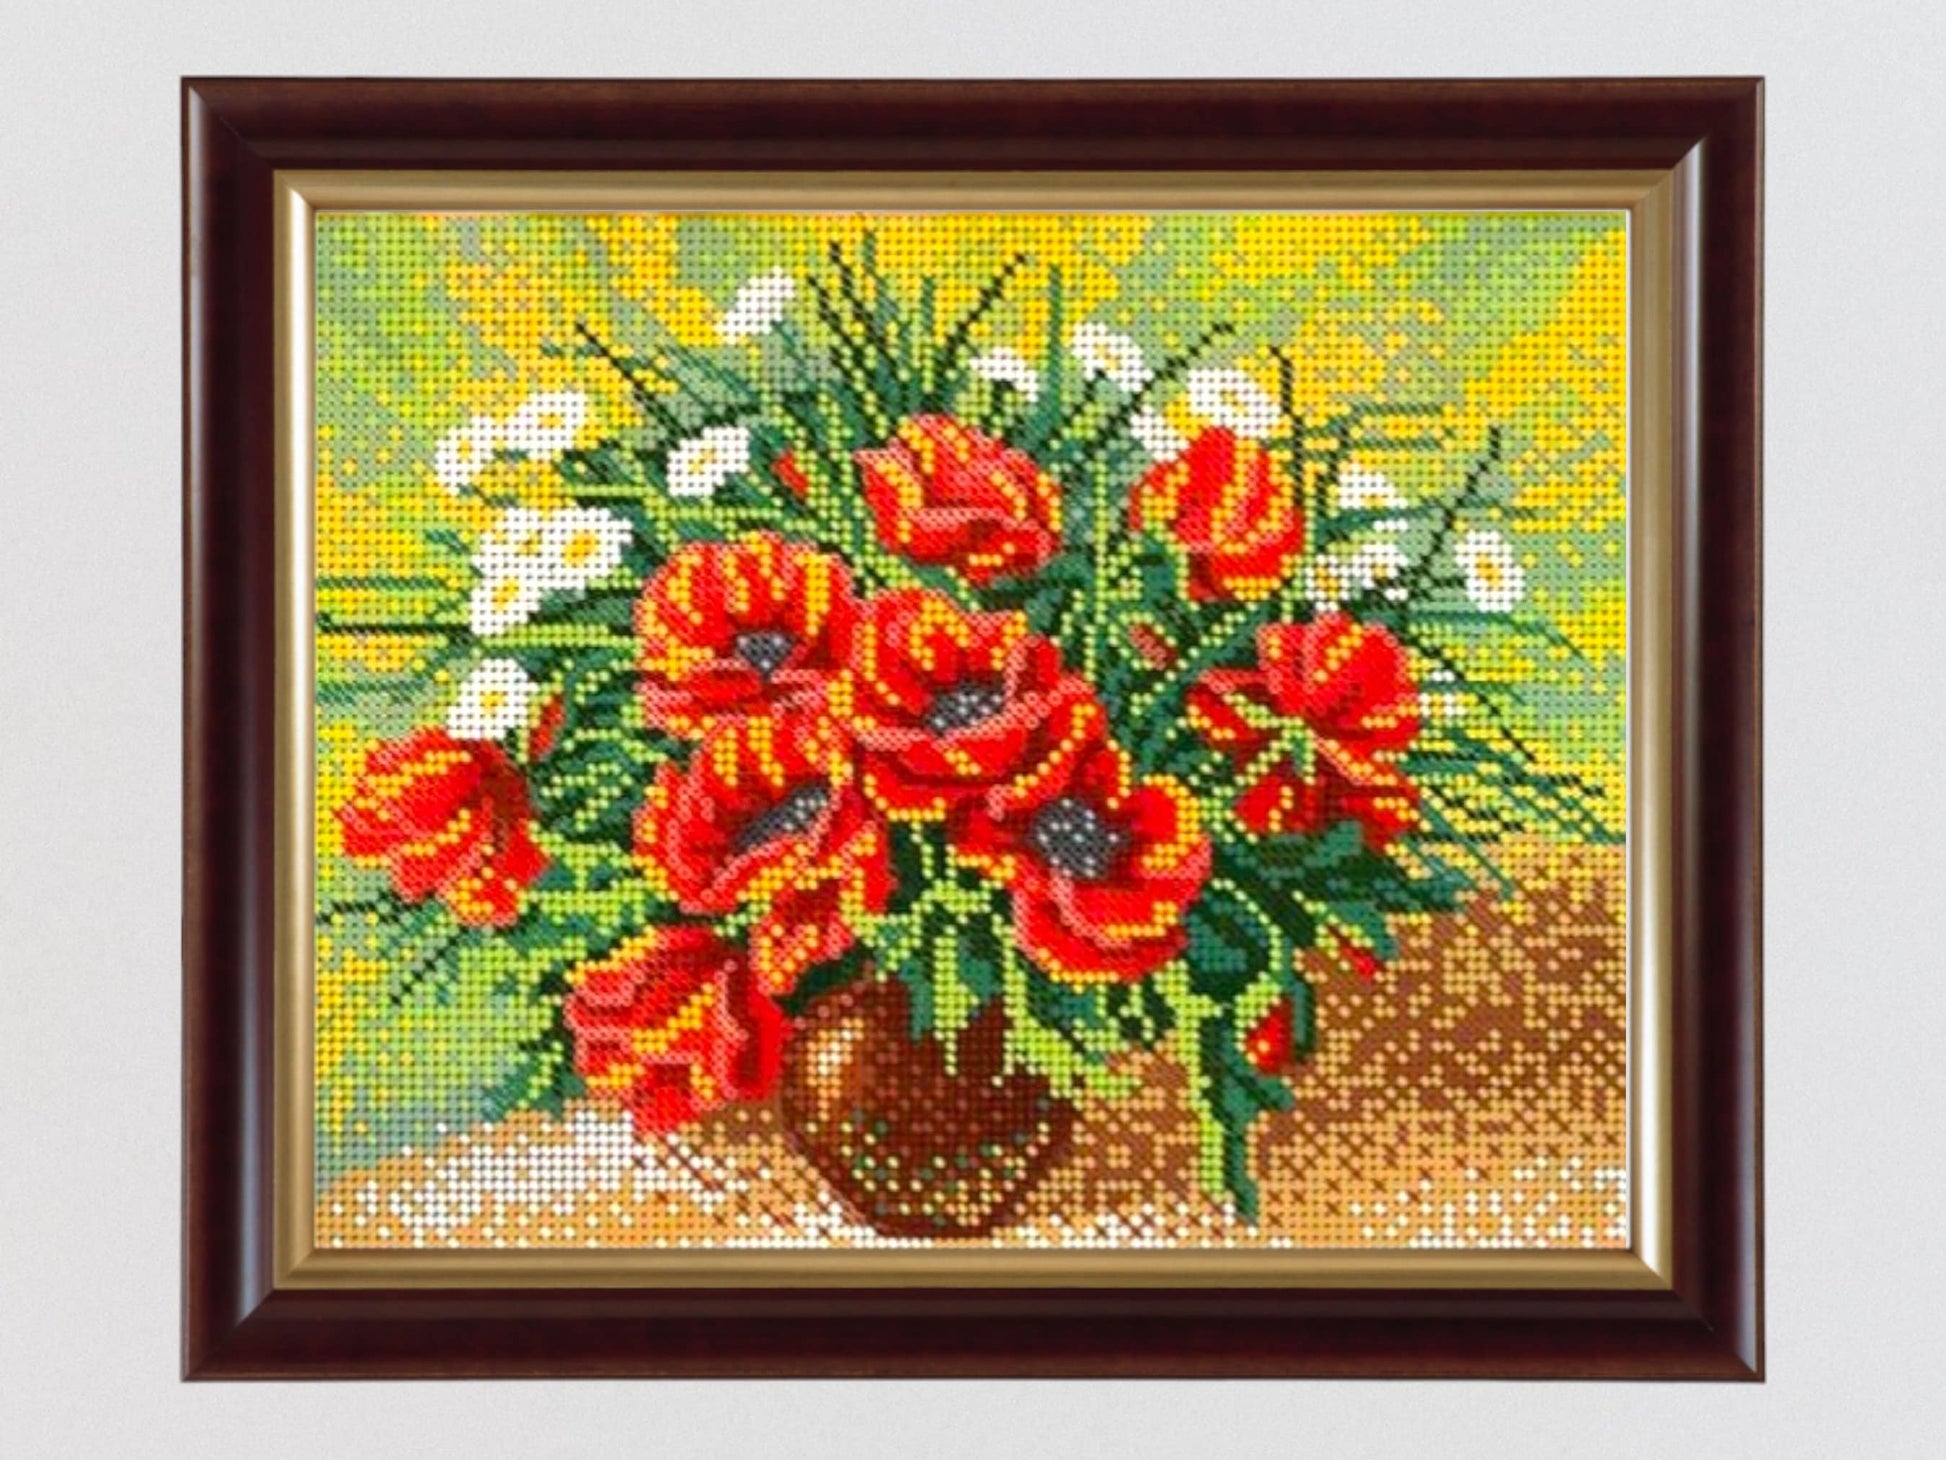 DIY Bead Embroidery Kit: Handcrafted Flowers, Poppies, and